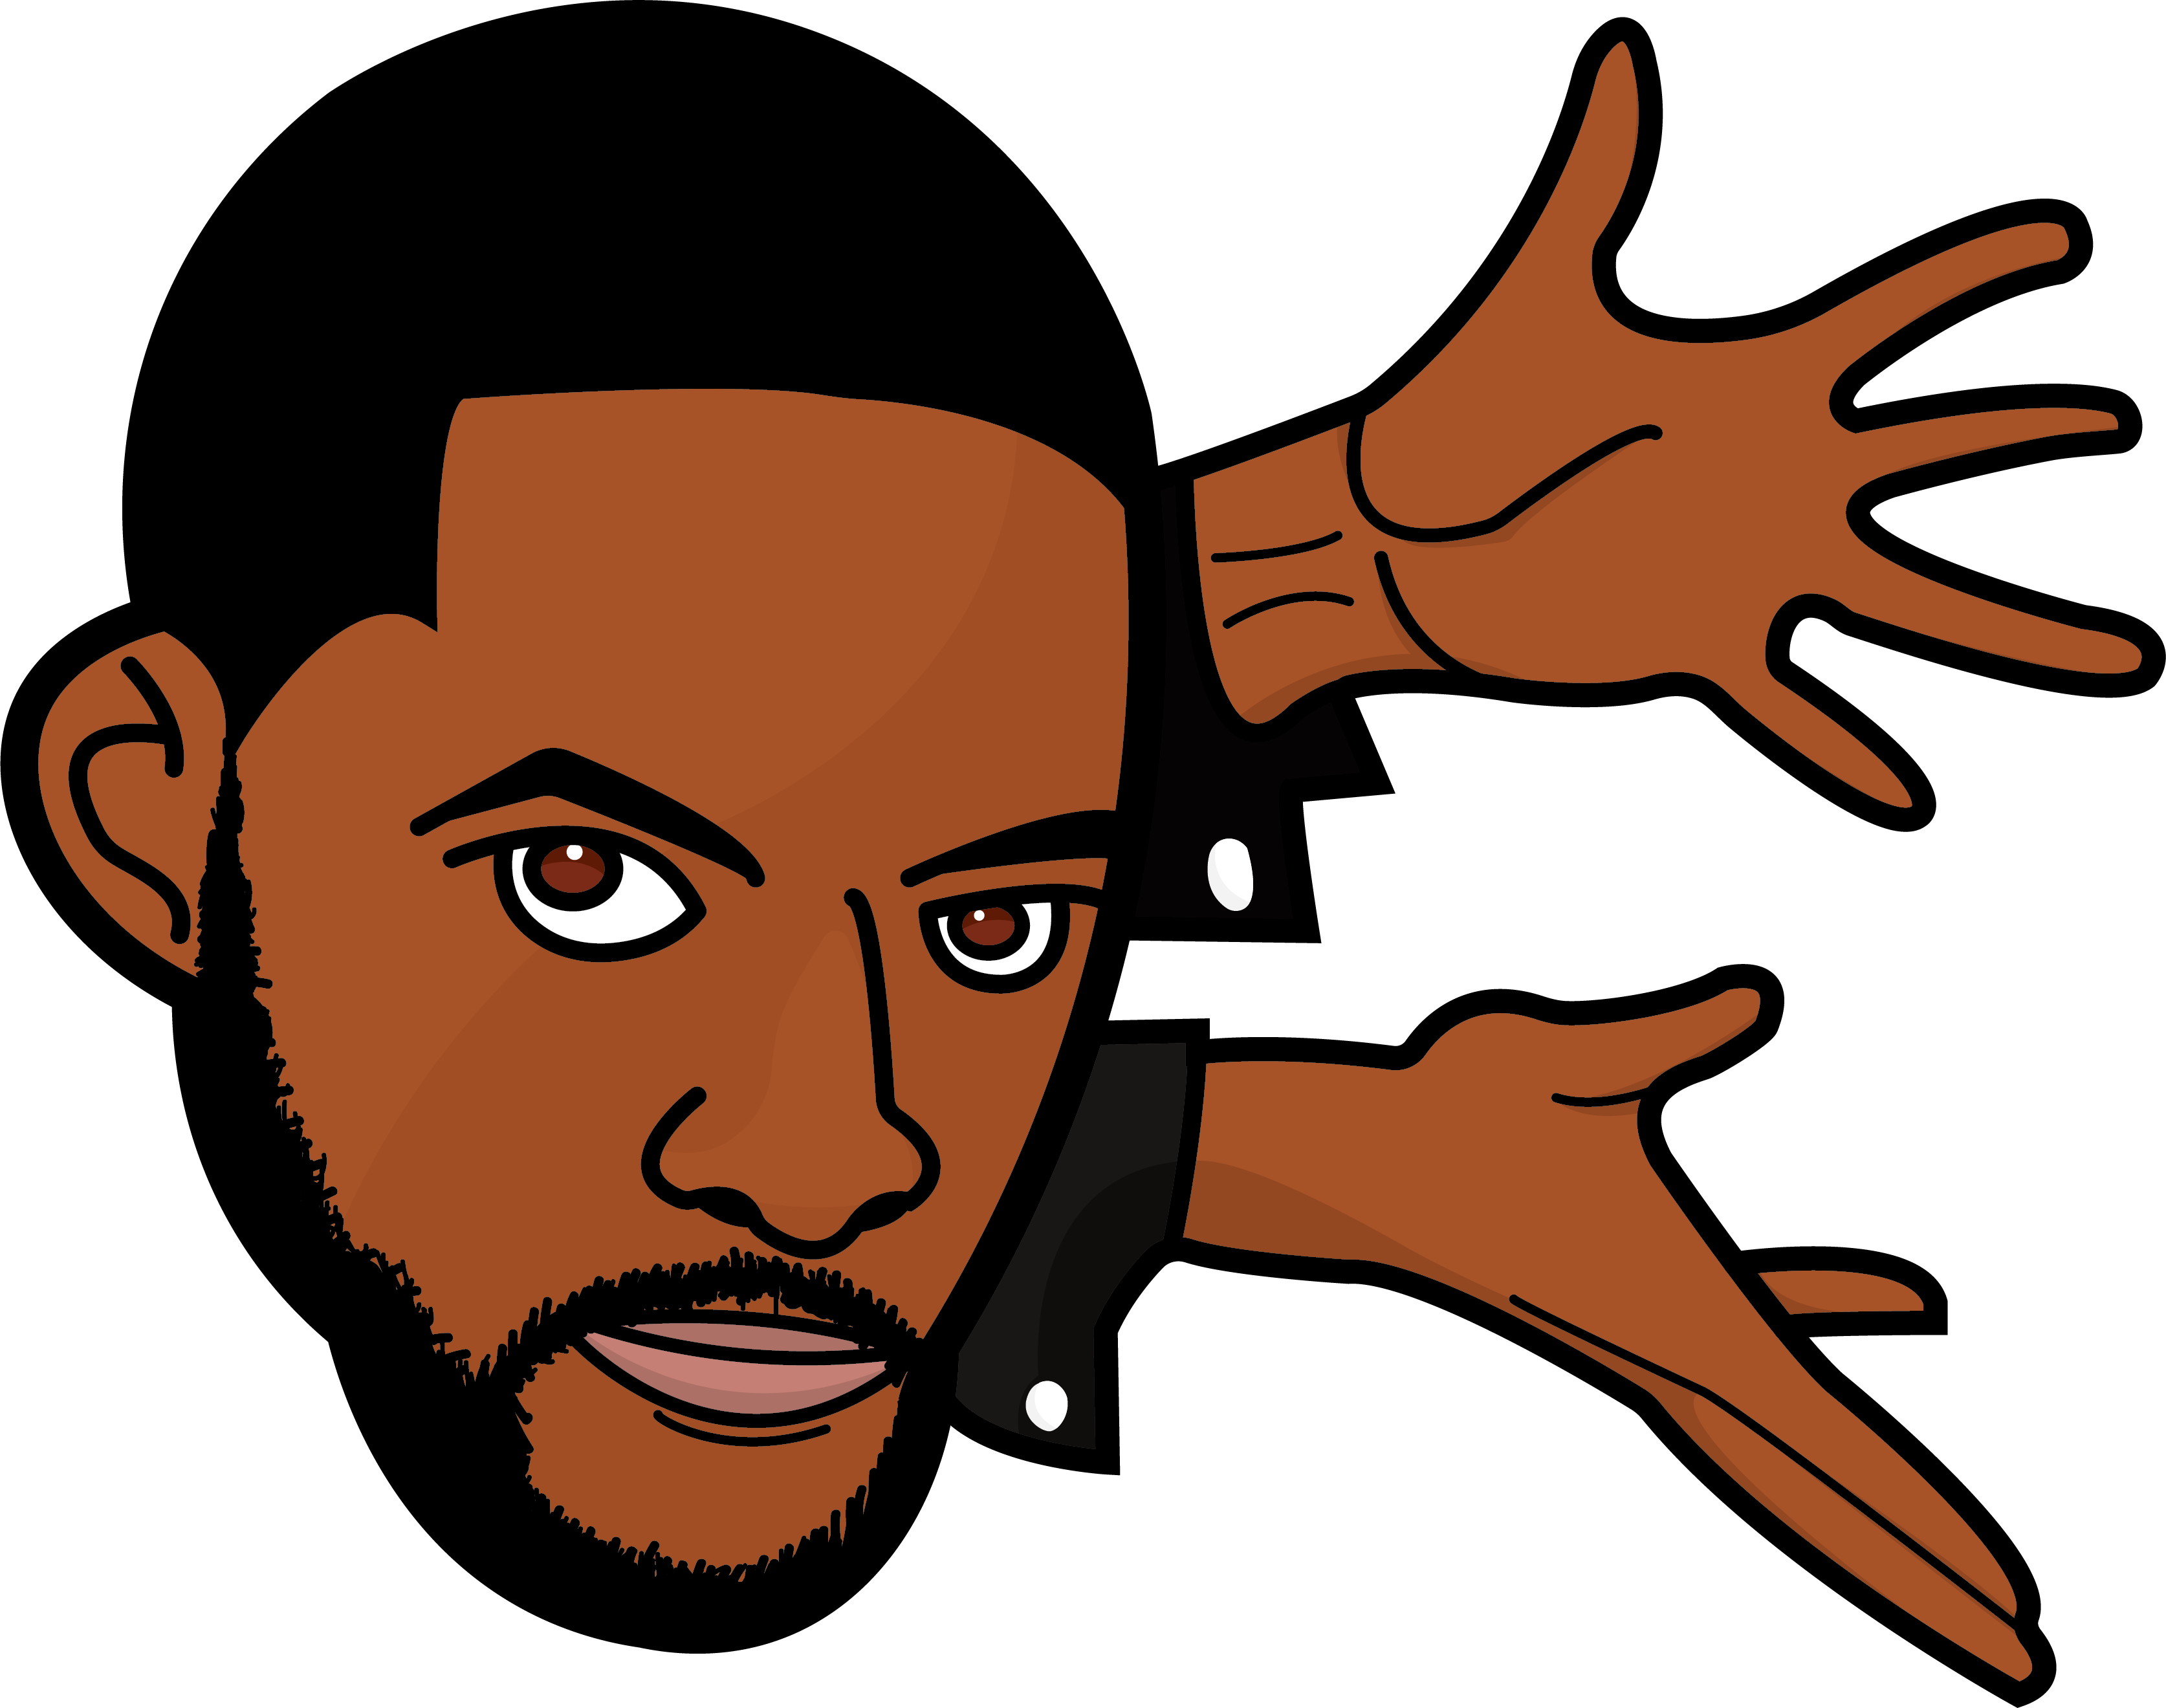 Will Smith Vector Artwork - Will Smith Vector Png (3348x2640)